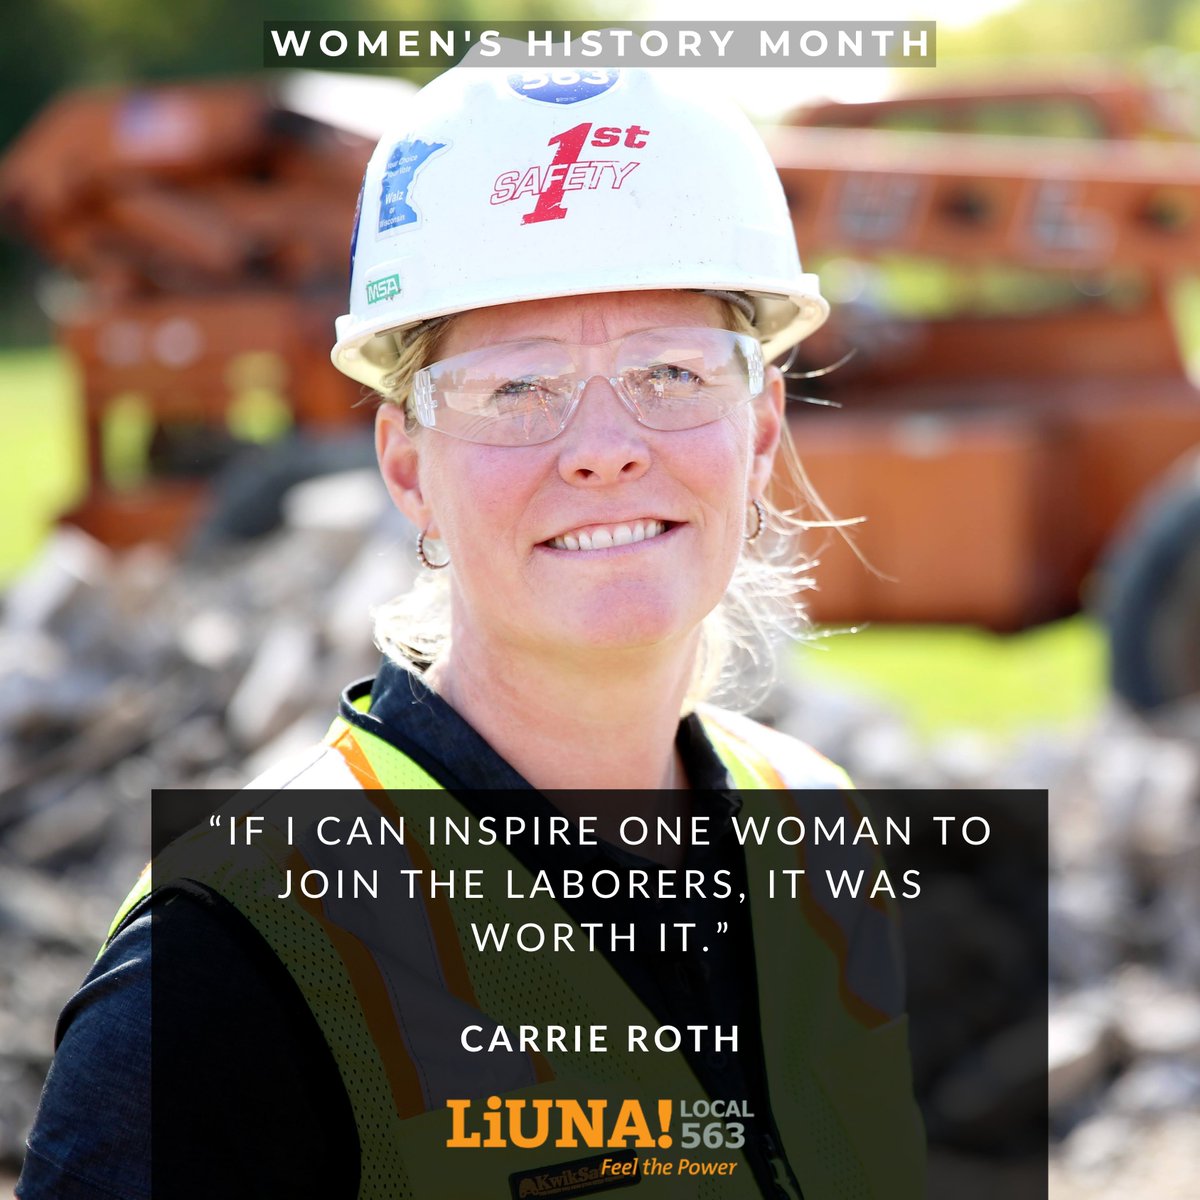 We're excited to recognize Carrie Roth during #WICWeek! Carrie is a #LIUNA Local 563 business agent and dedicated mentor to young #Laborers. Thanks to her dedication and leadership, the future of #MNTrades is more inclusive, accessible and fair. #WomenInConstructionWeek